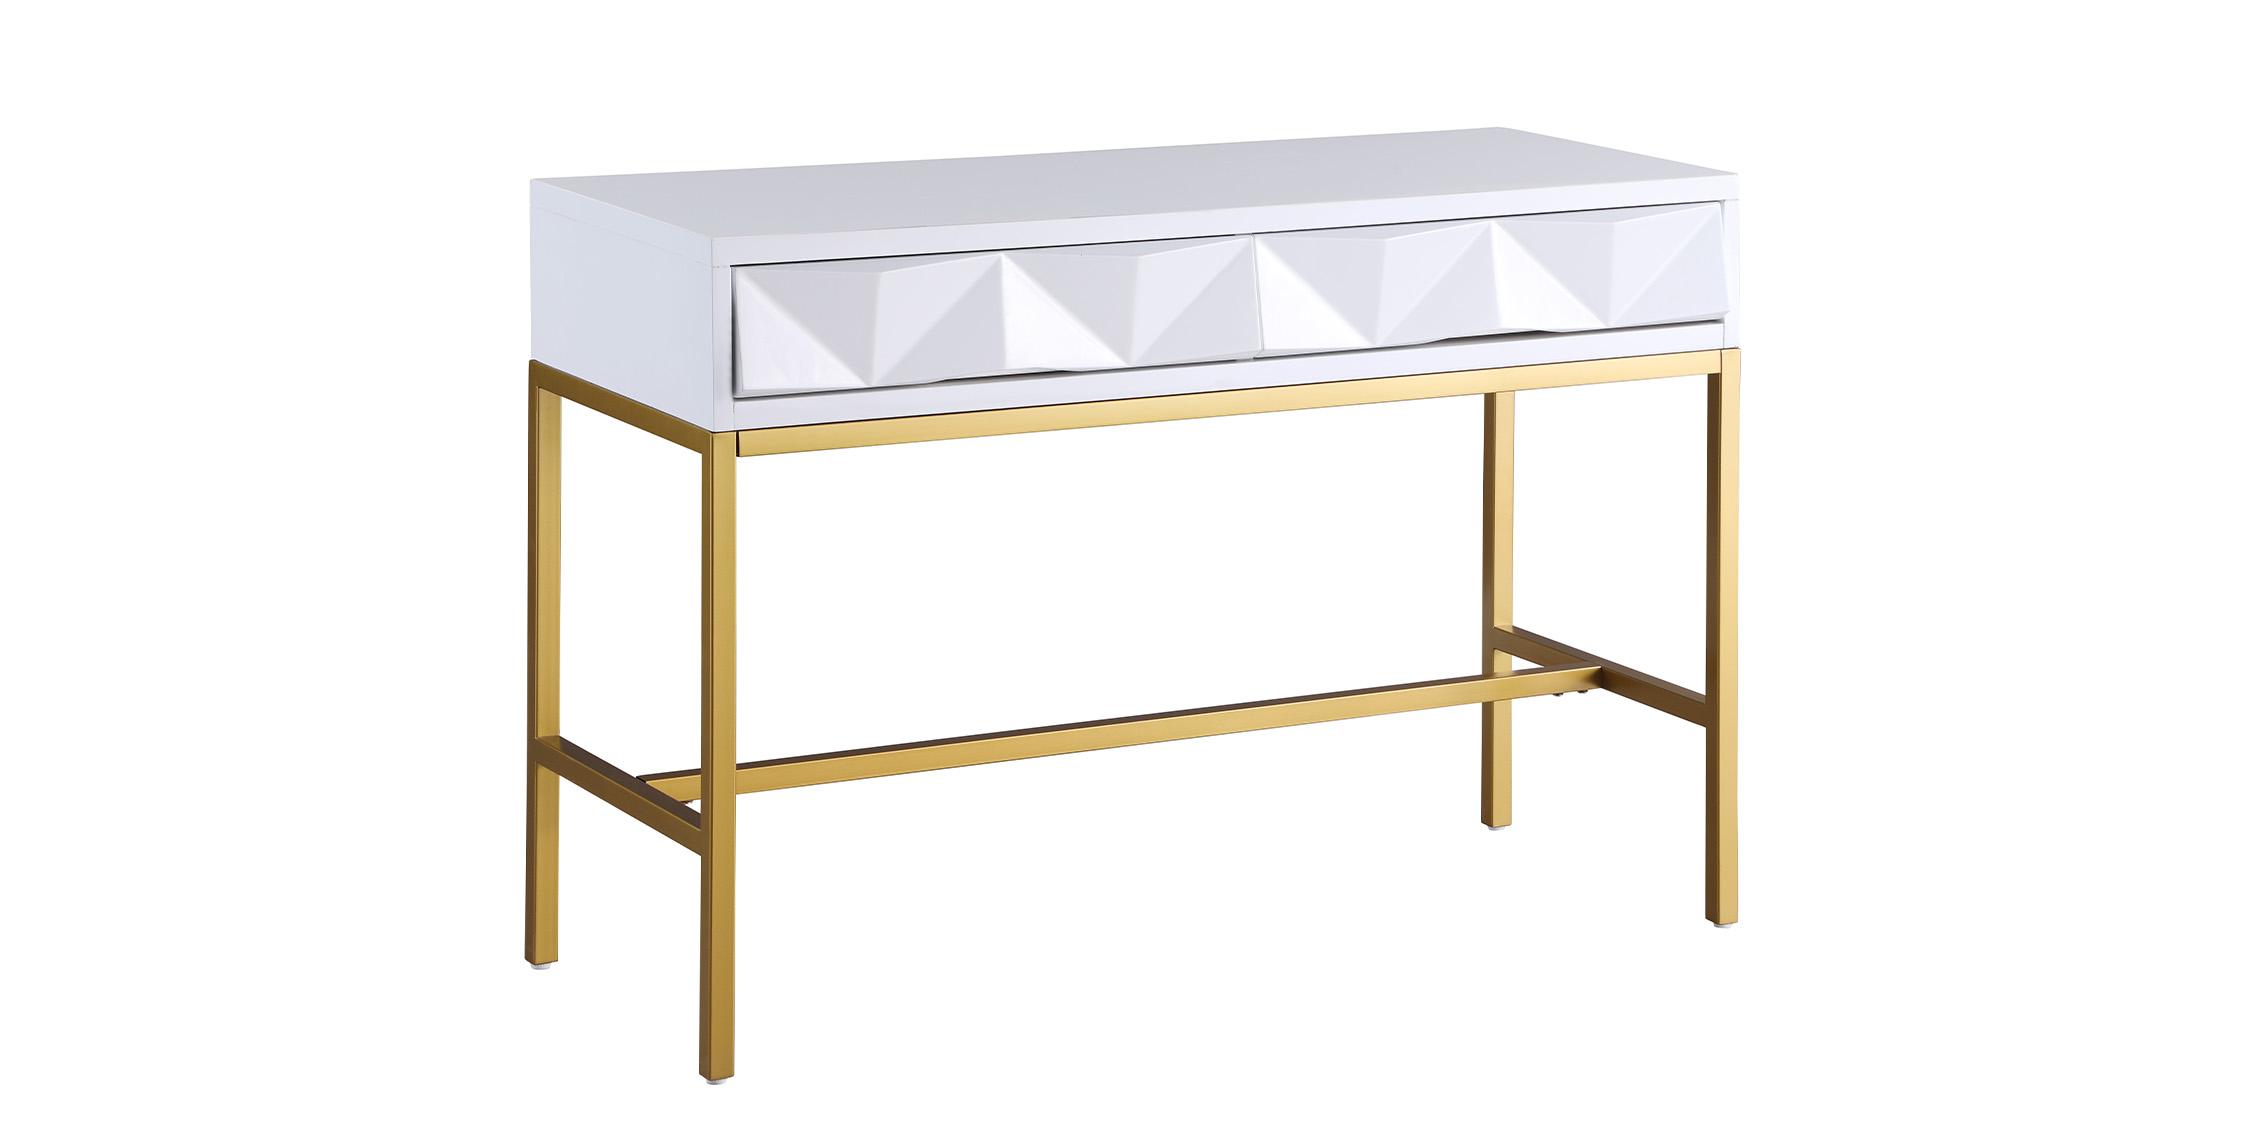 Contemporary, Modern Console Table PANDORA 426-T 426-T in White, Gold 